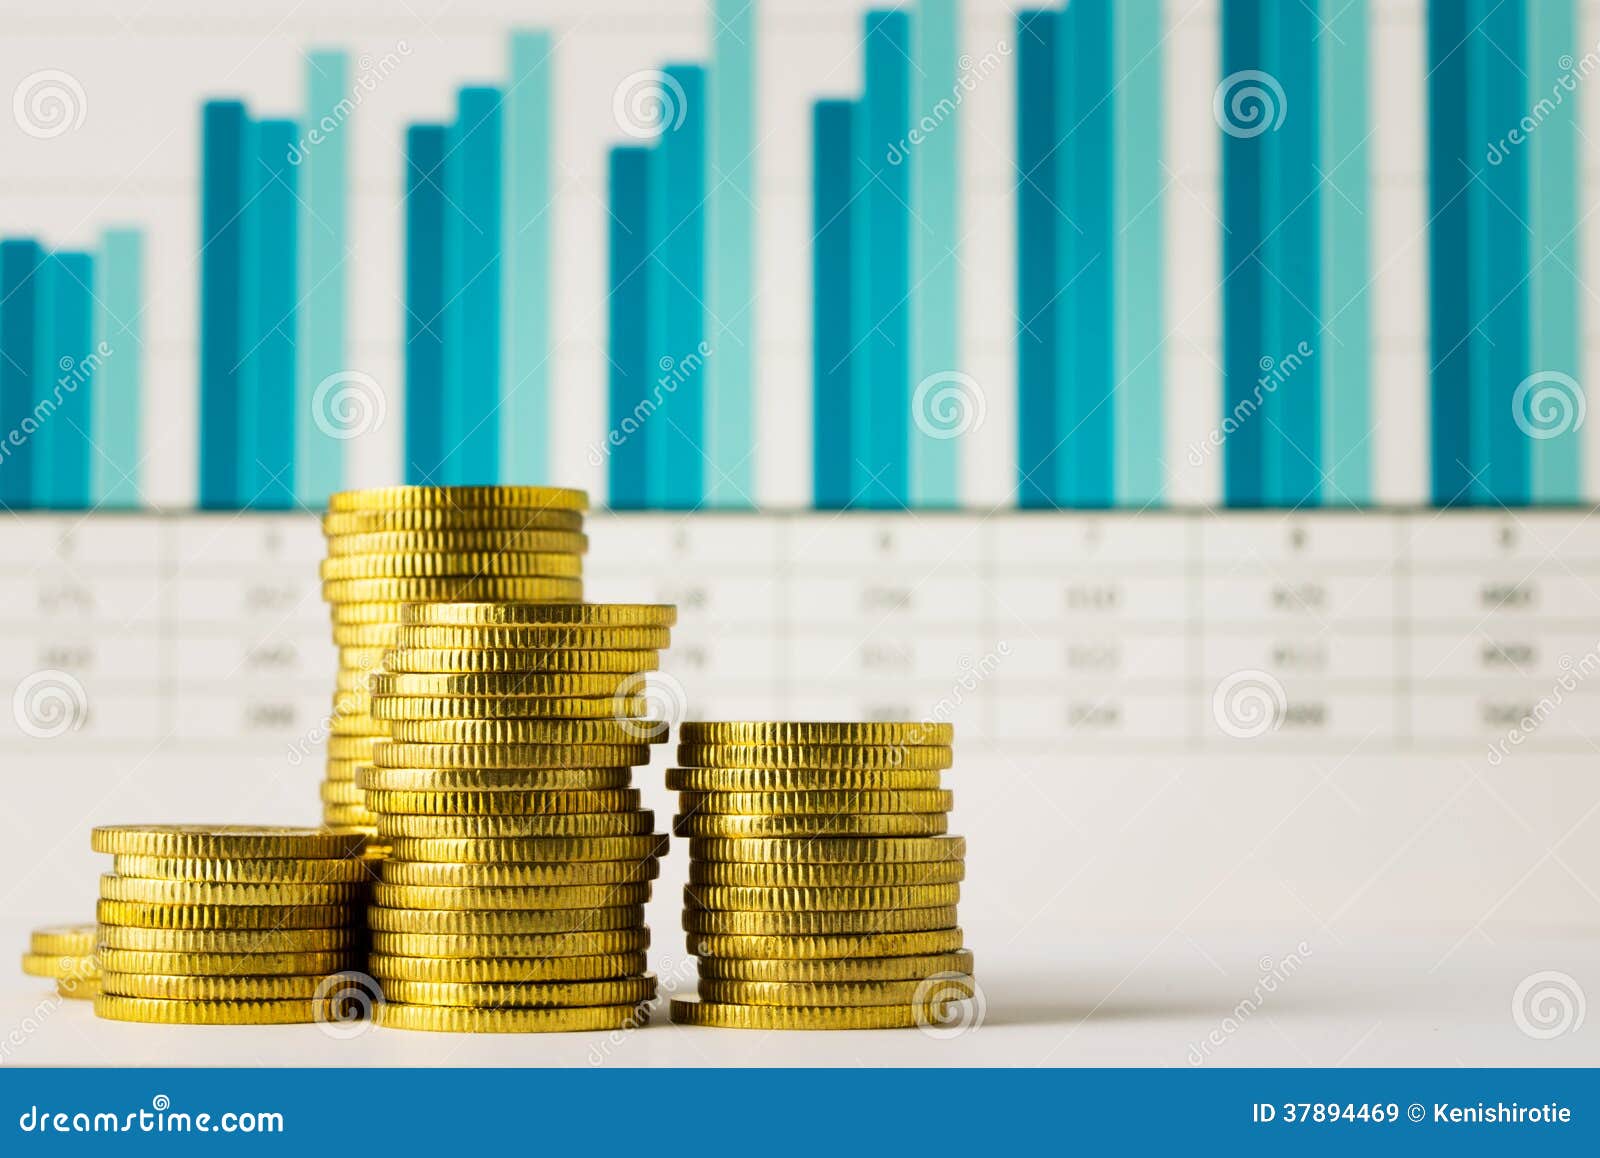 gold coins with financial chart